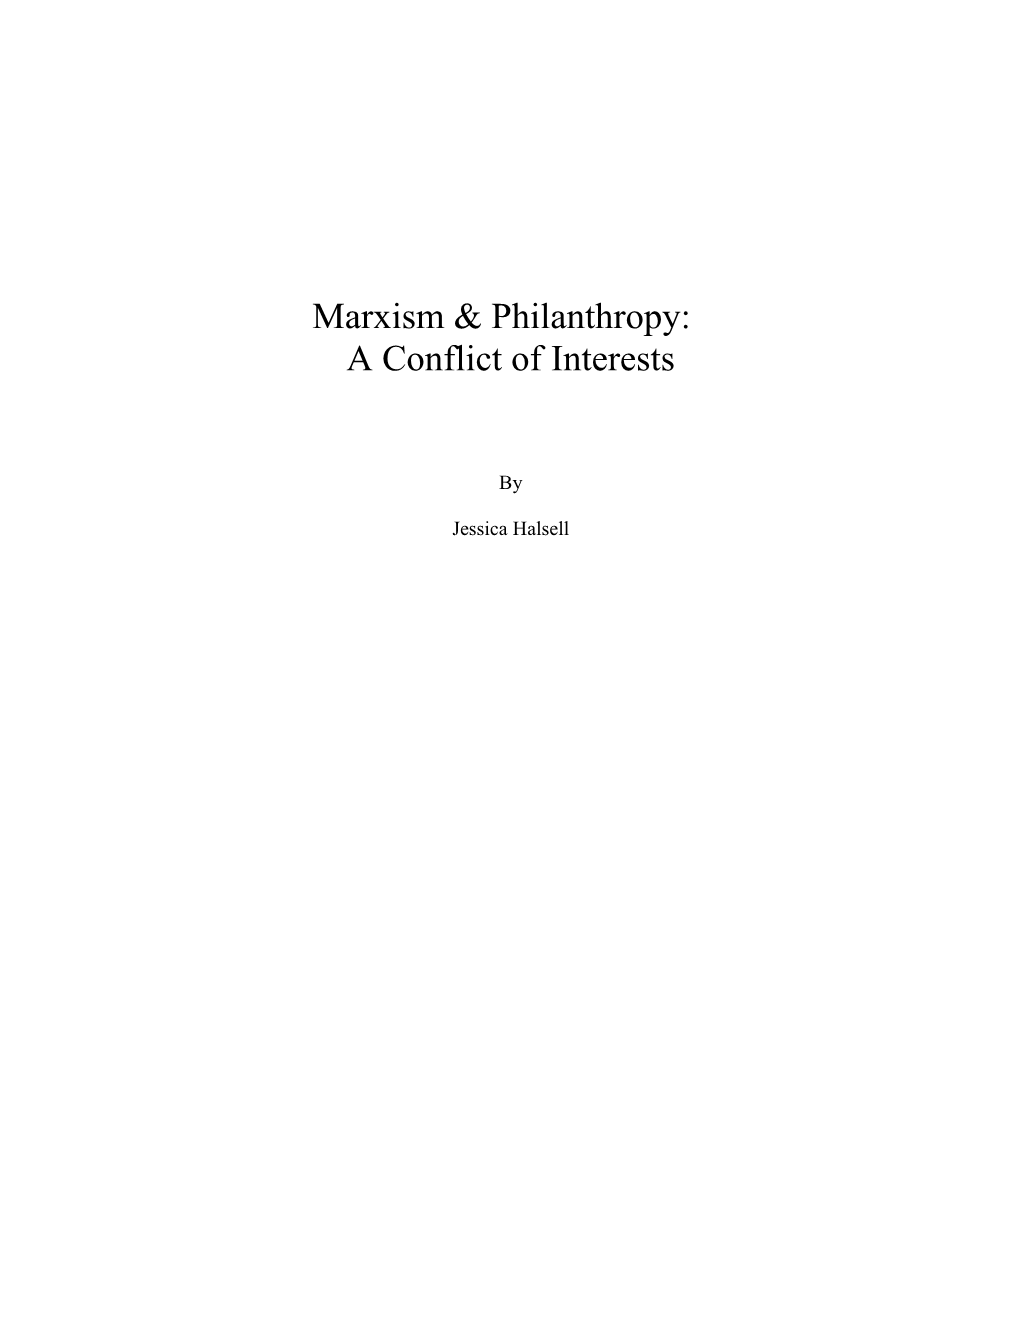 Marxism & Philanthropy: a Possible Conflict of Interests